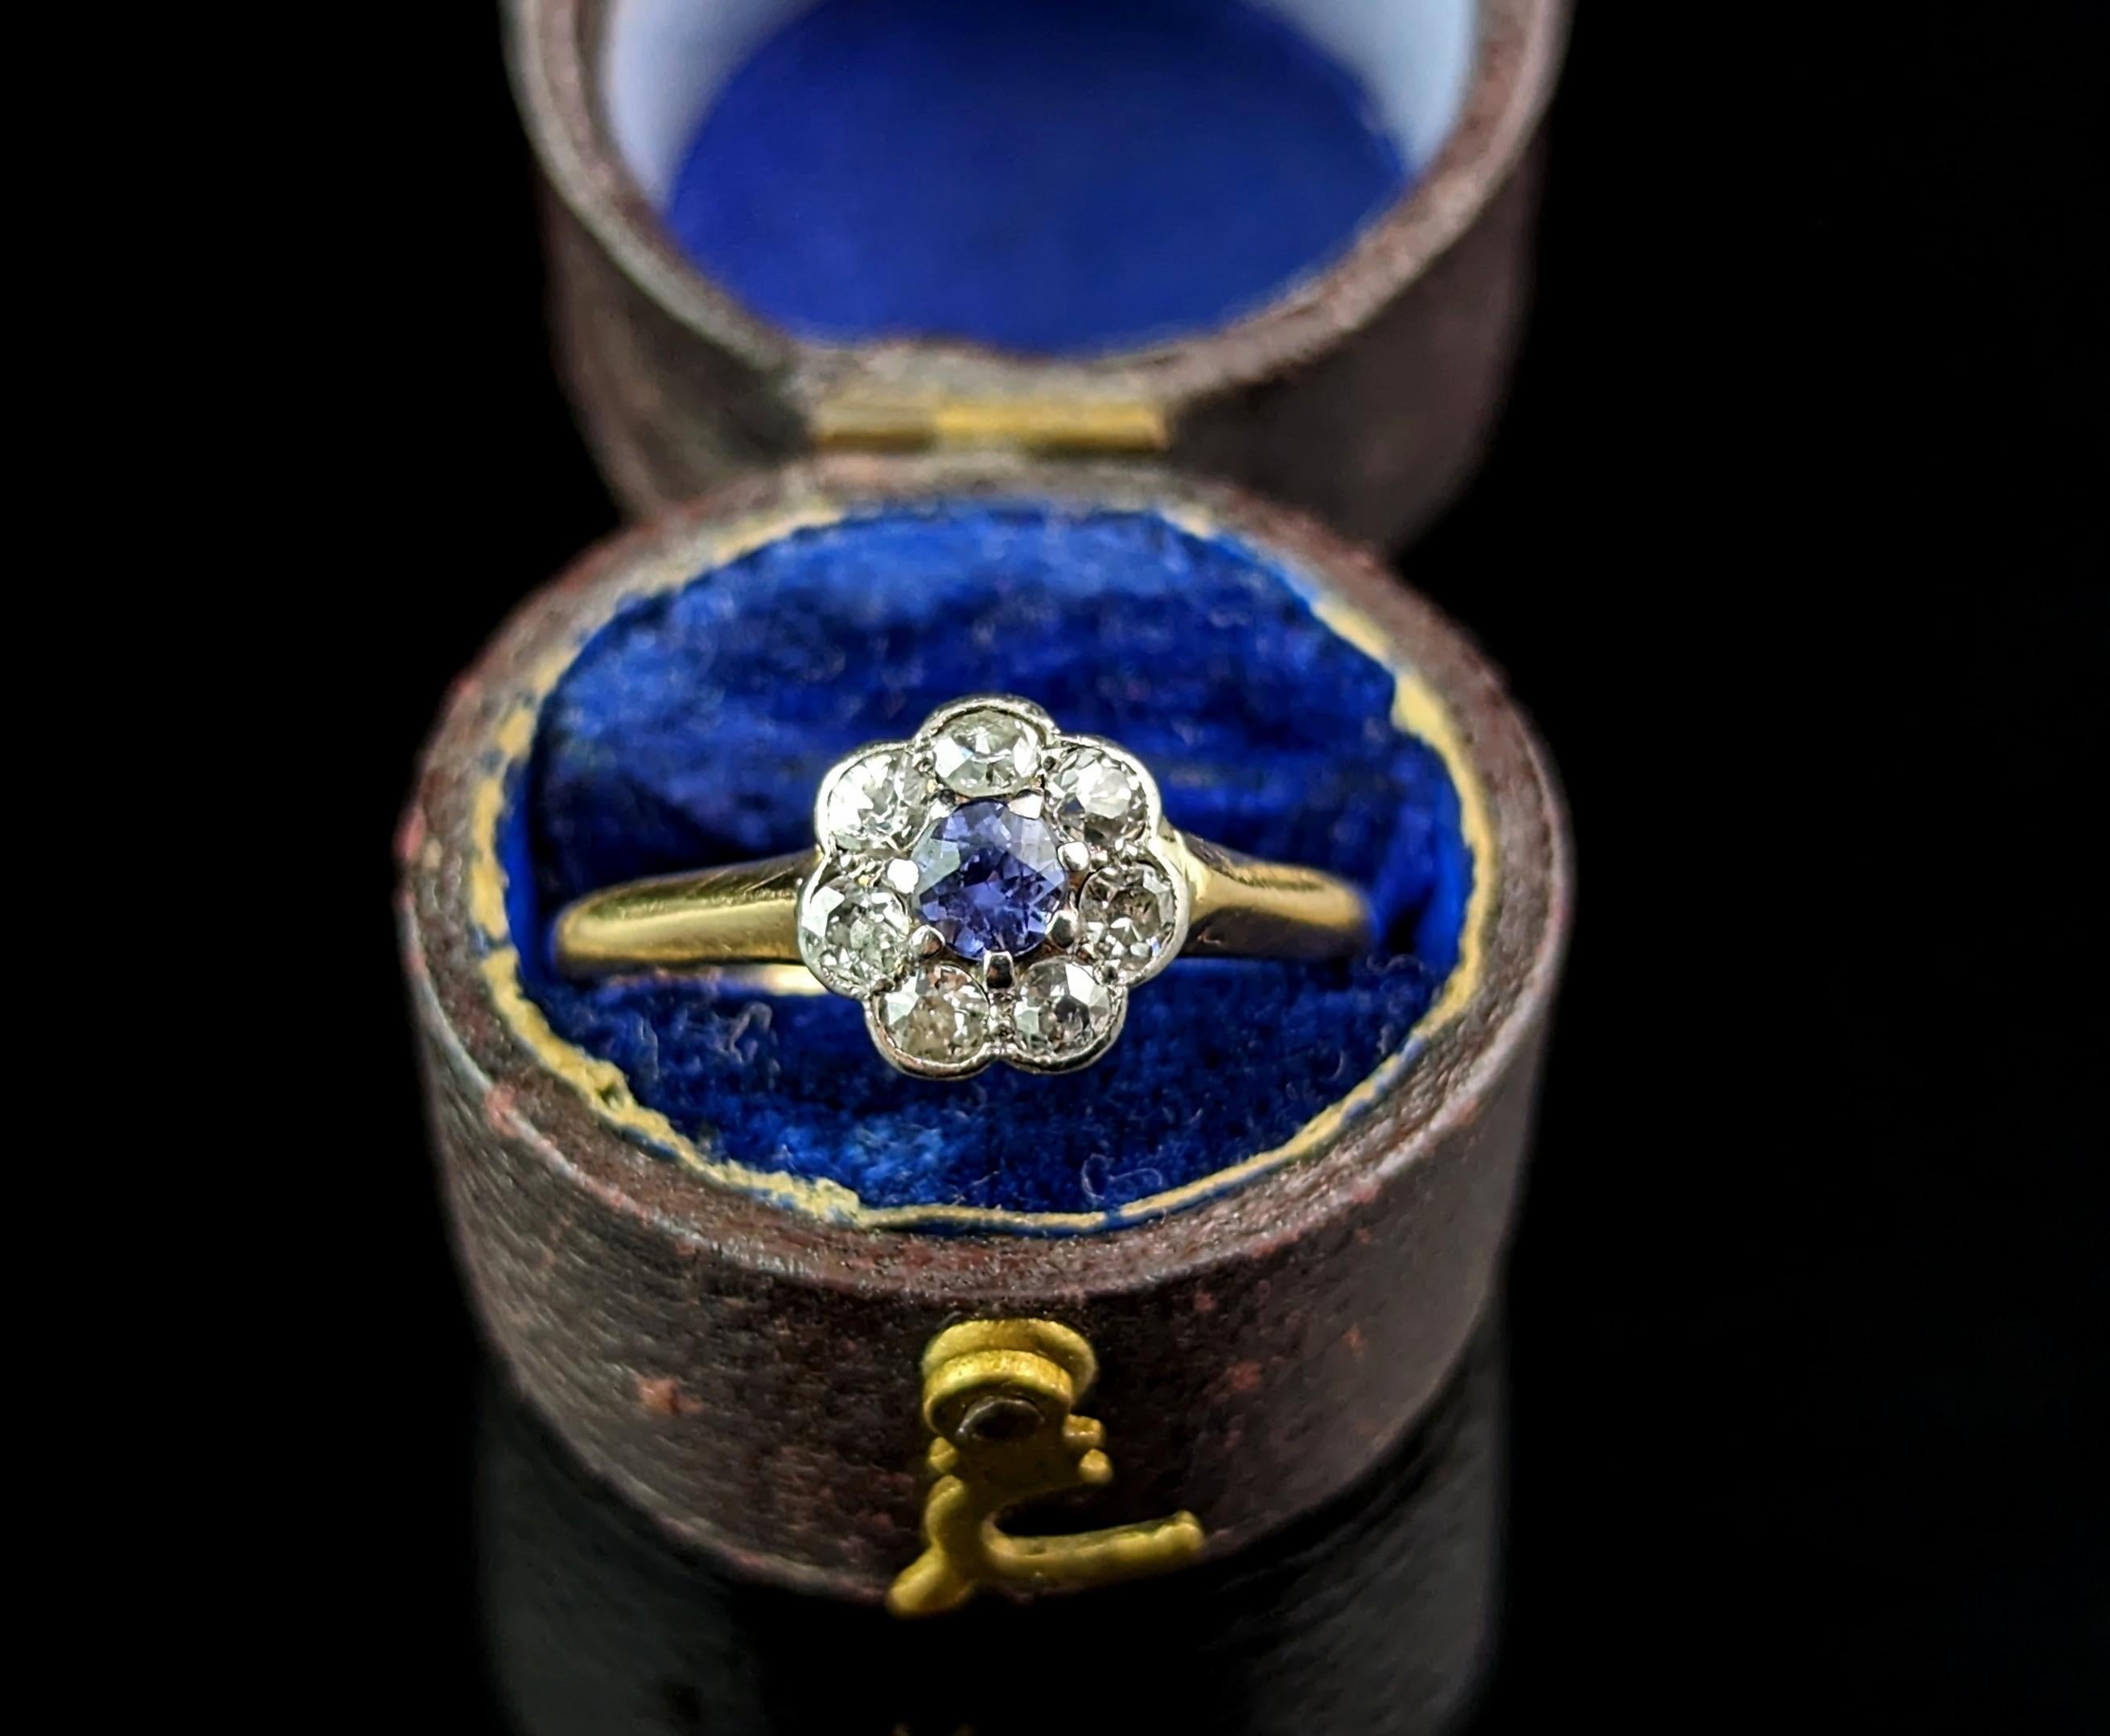 The prettiest little antique Art Deco flower ring!

This early 20th Century beauty is crafted in lush 18ct yellow gold with a gorgeous cornflower blue sapphire set to the centre of the face surrounded by a halo of twinkling old cut diamonds.

It is